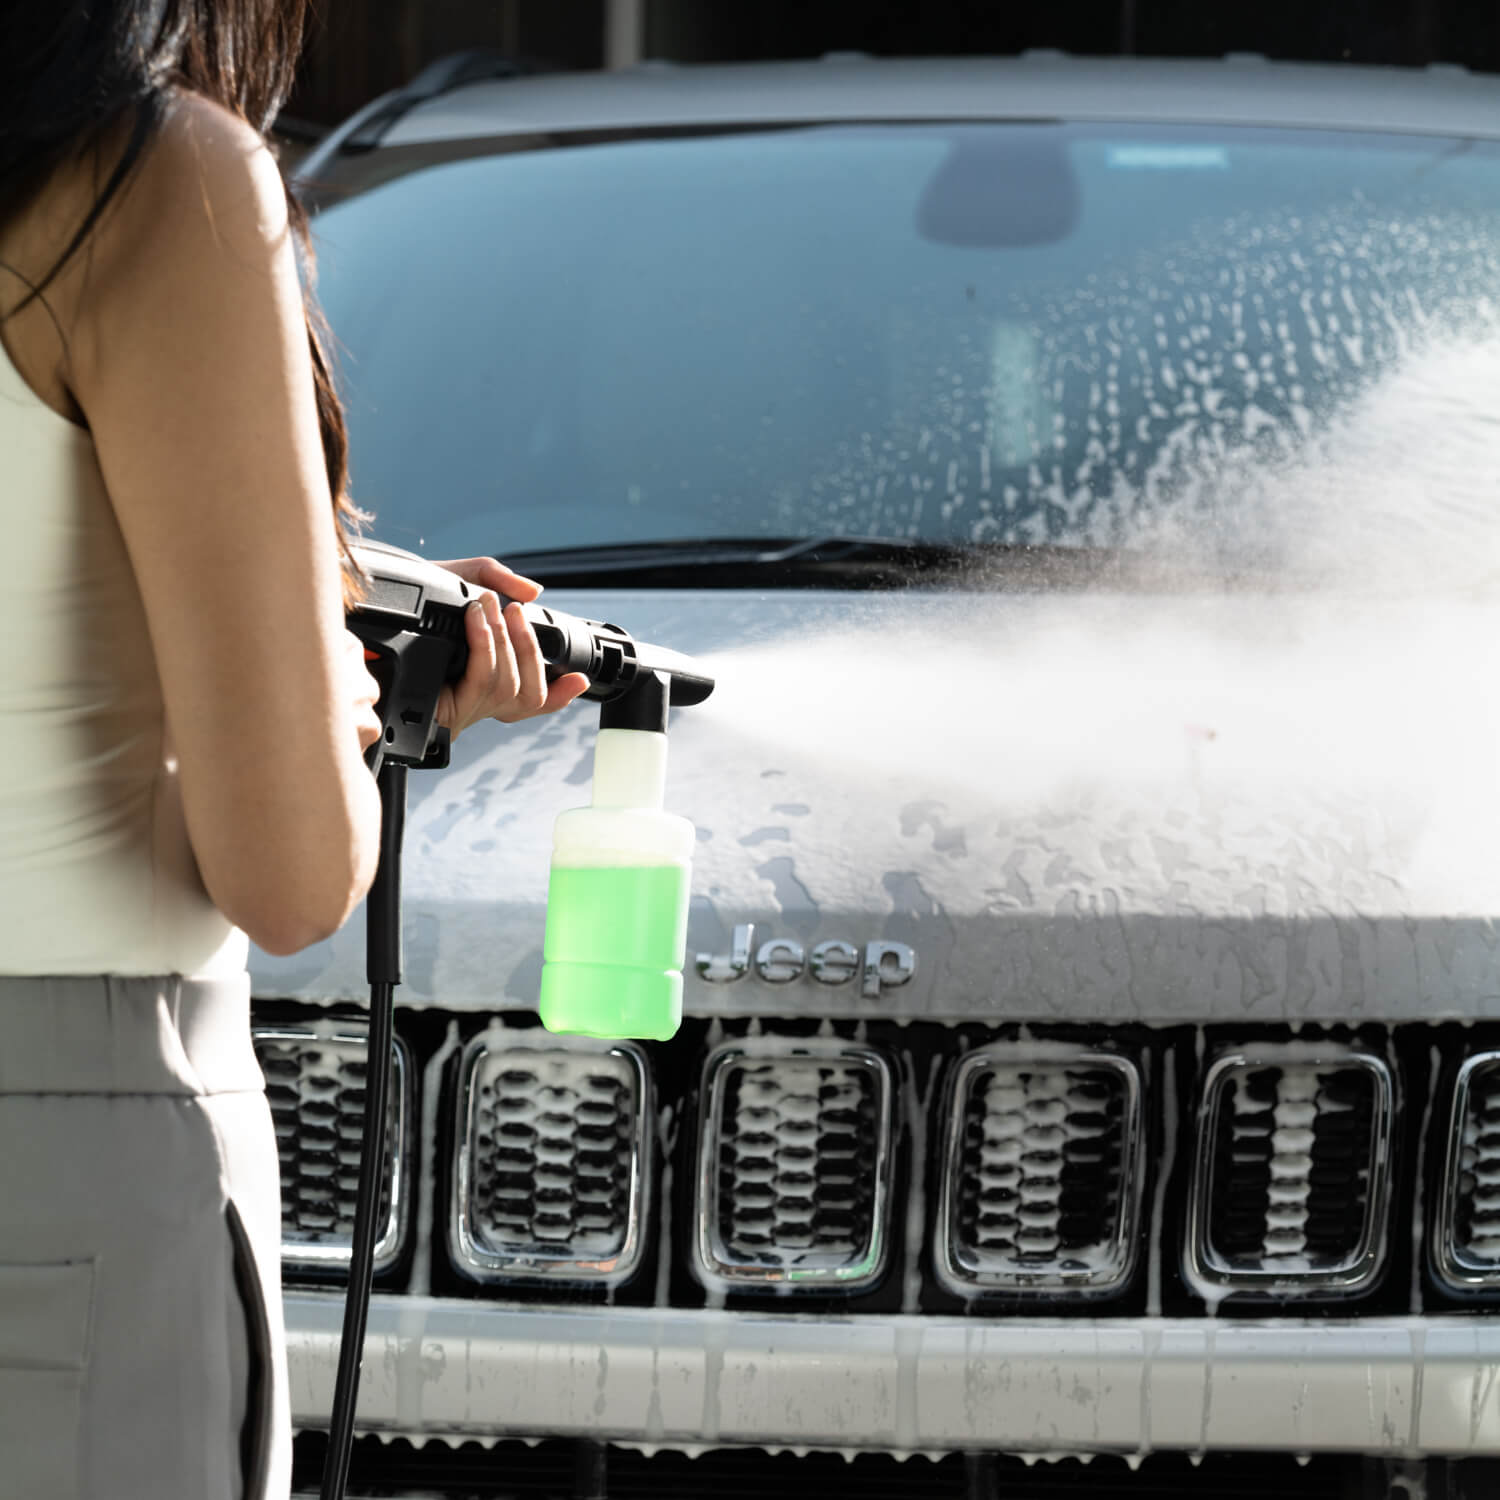 The image showcases the OS PW140 pressure washer, a versatile cleaning tool uses for cleaning a Jeep Compass Car specially focuses on car